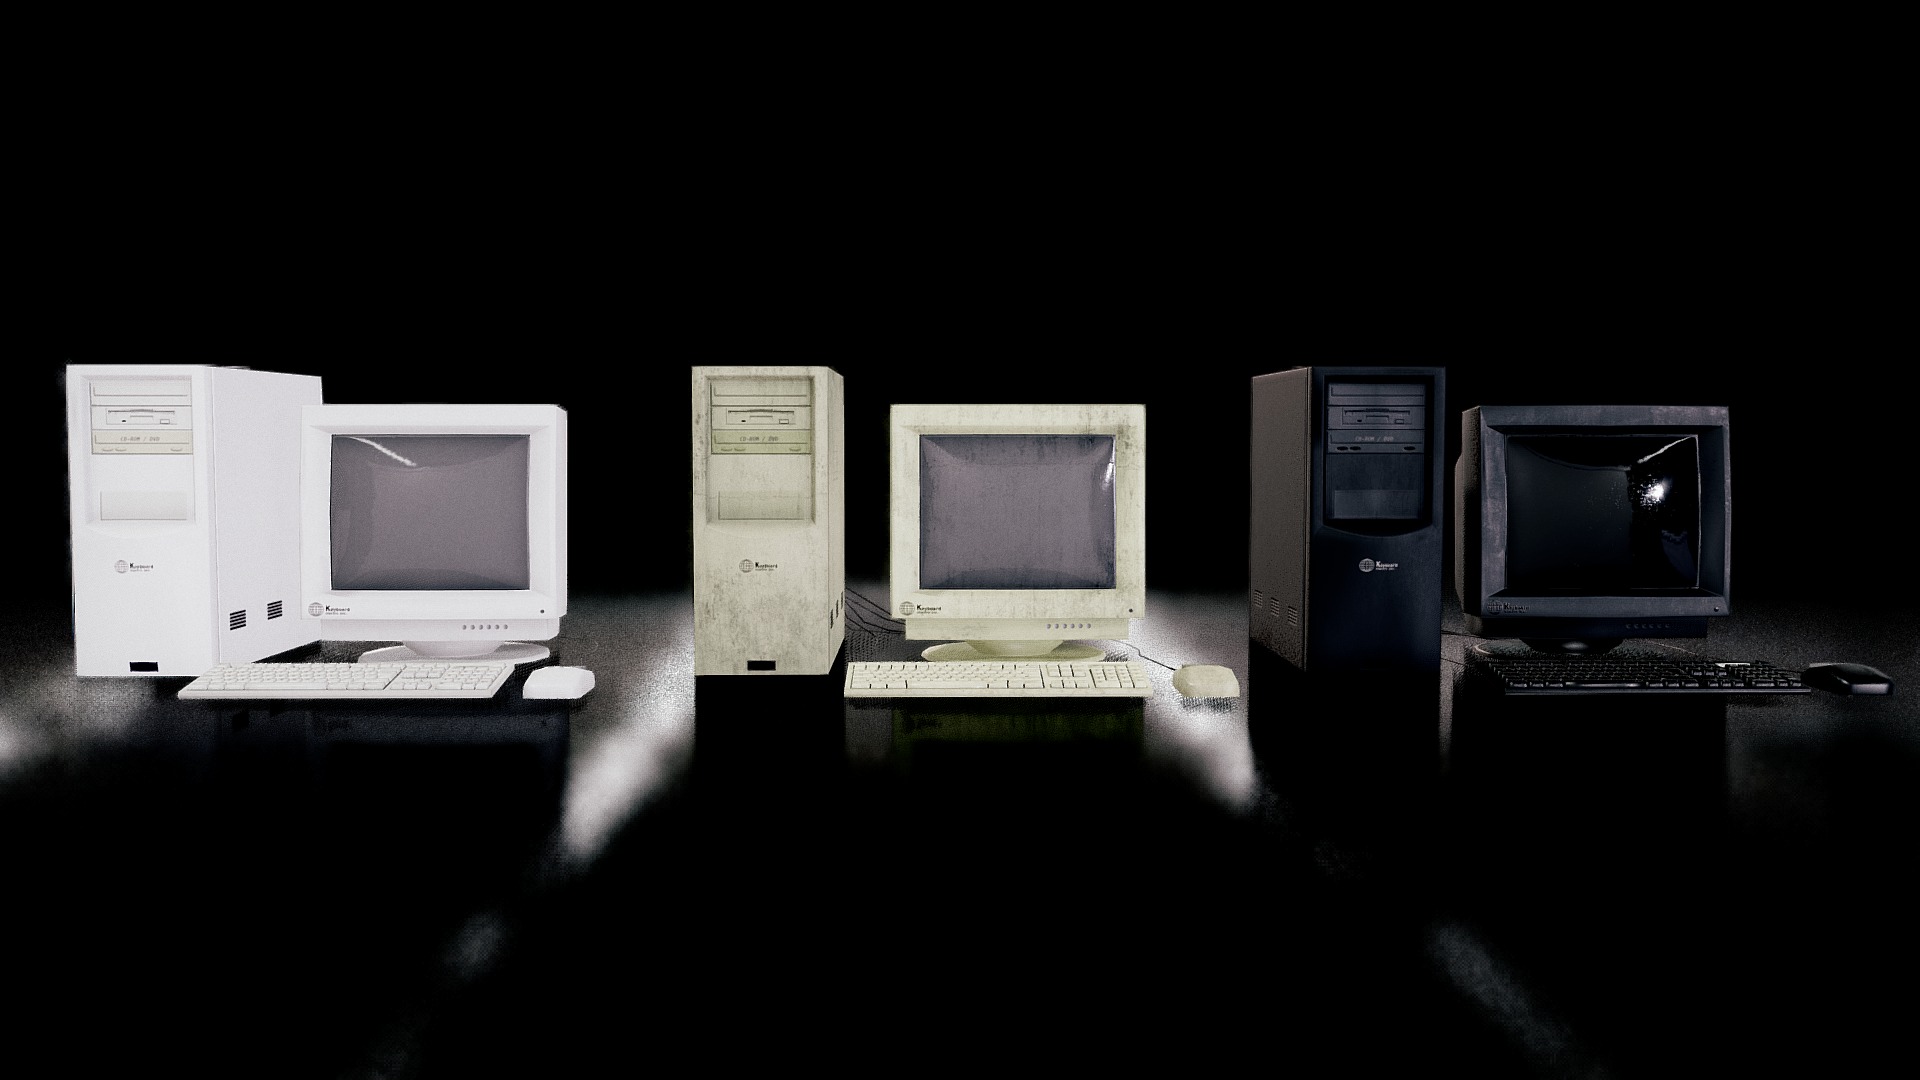 3D model Low poly Retro computers #2 – Store pack - This is a 3D model of the Low poly Retro computers #2 - Store pack. The 3D model is about several computers on a table.